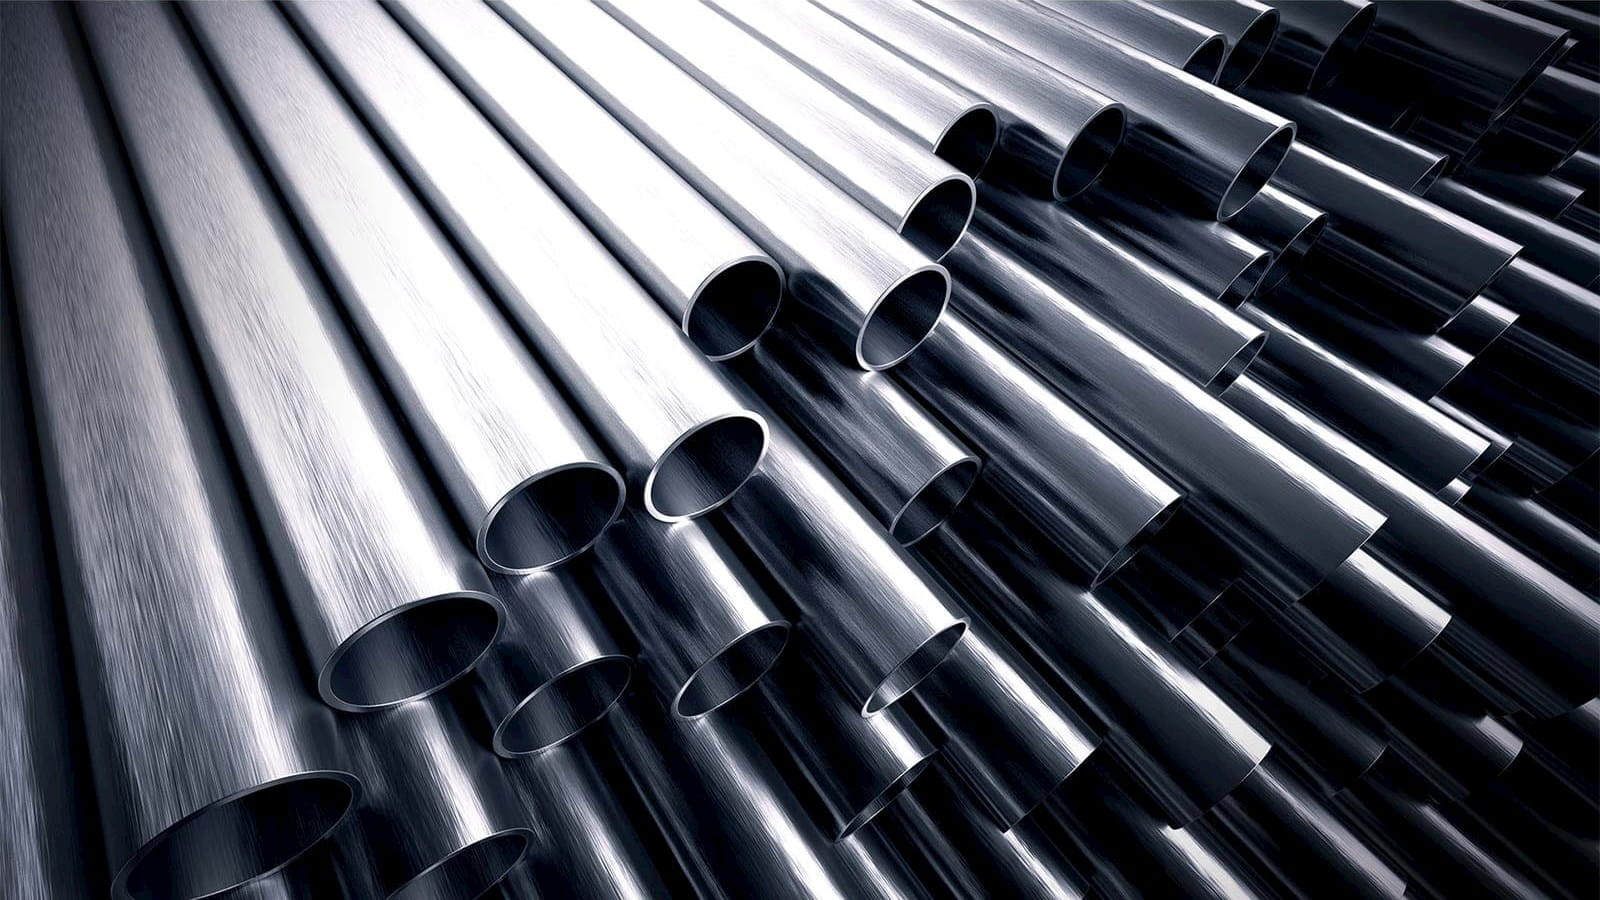 dark silver metal steel pipes stacked on top of each other